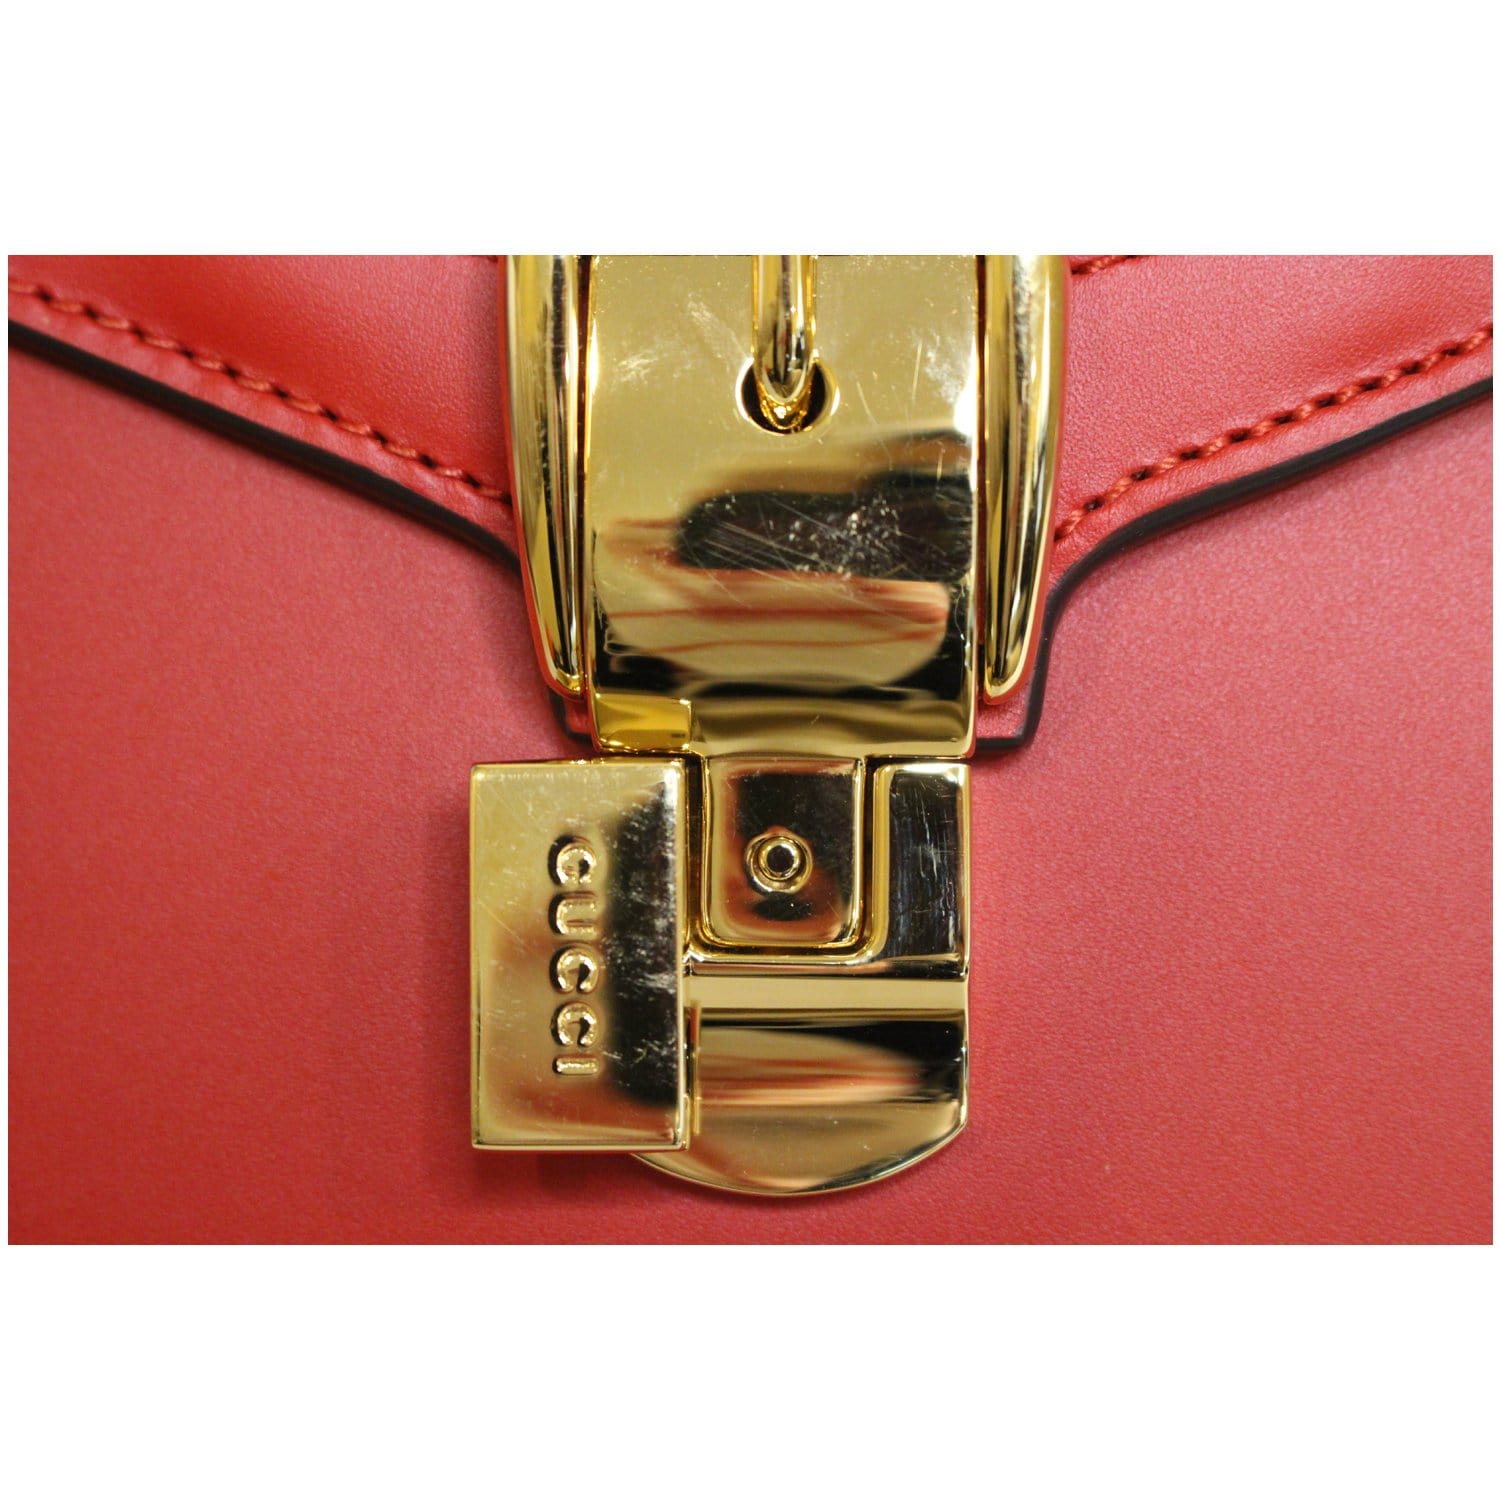 Gucci Red Leather Small Sylvie Web Shoulder Bag Gucci